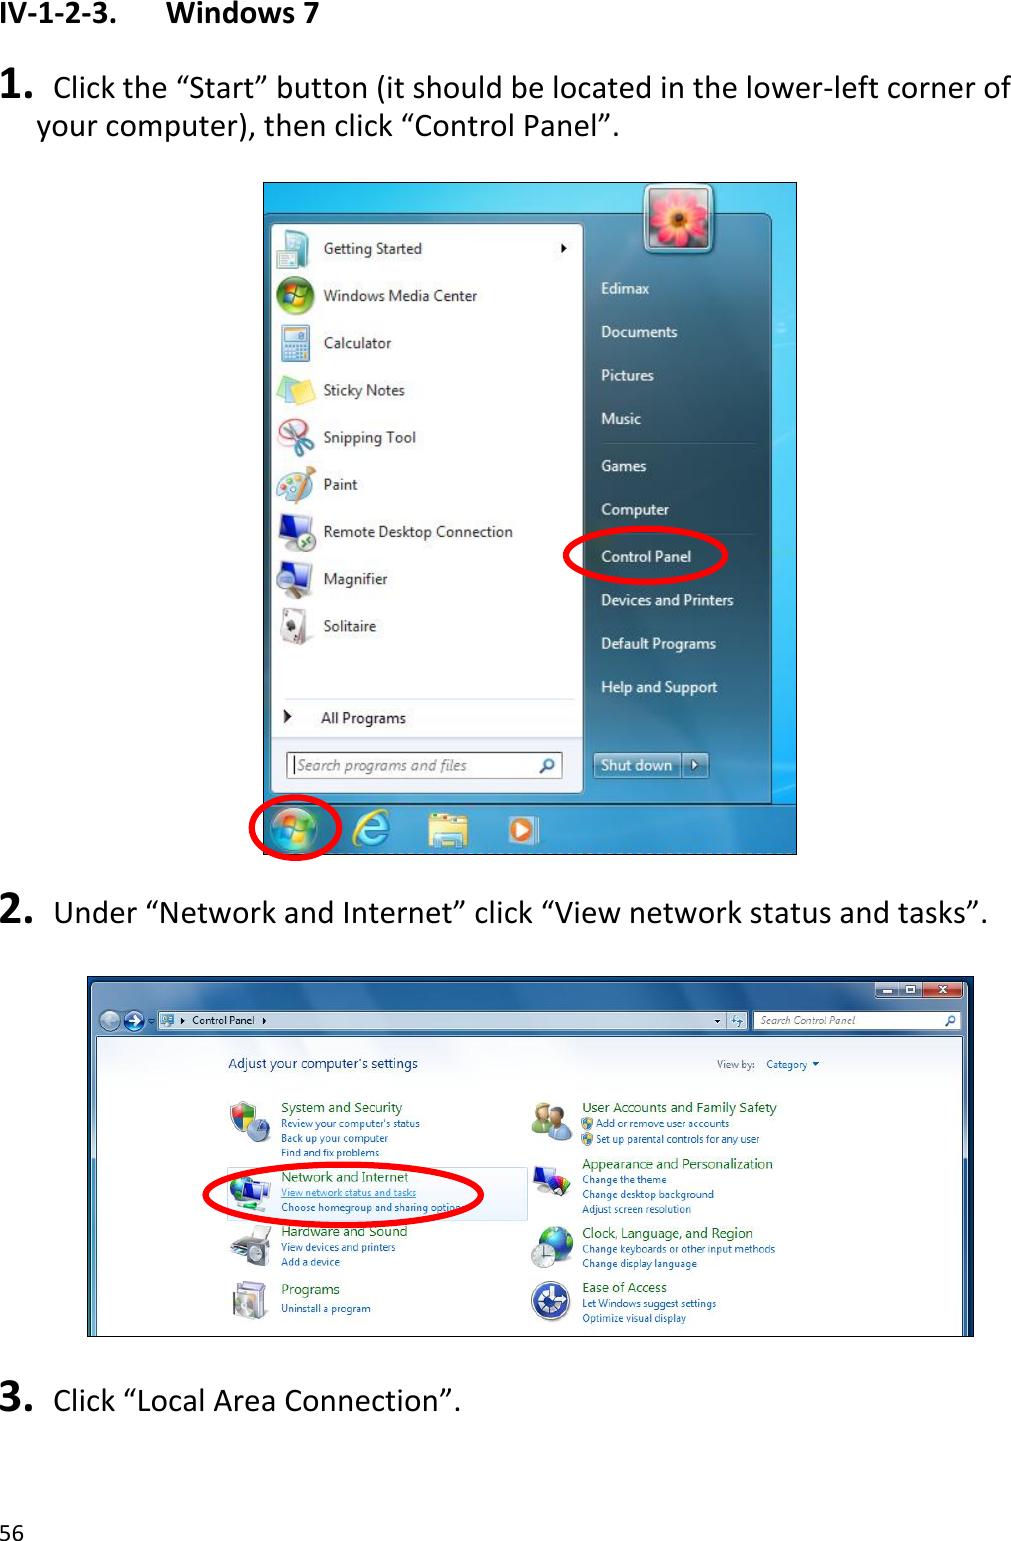 56  IV-1-2-3.    Windows 7  1.  Click the “Start” button (it should be located in the lower-left corner of your computer), then click “Control Panel”.    2.  Under “Network and Internet” click “View network status and tasks”.    3.  Click “Local Area Connection”.  